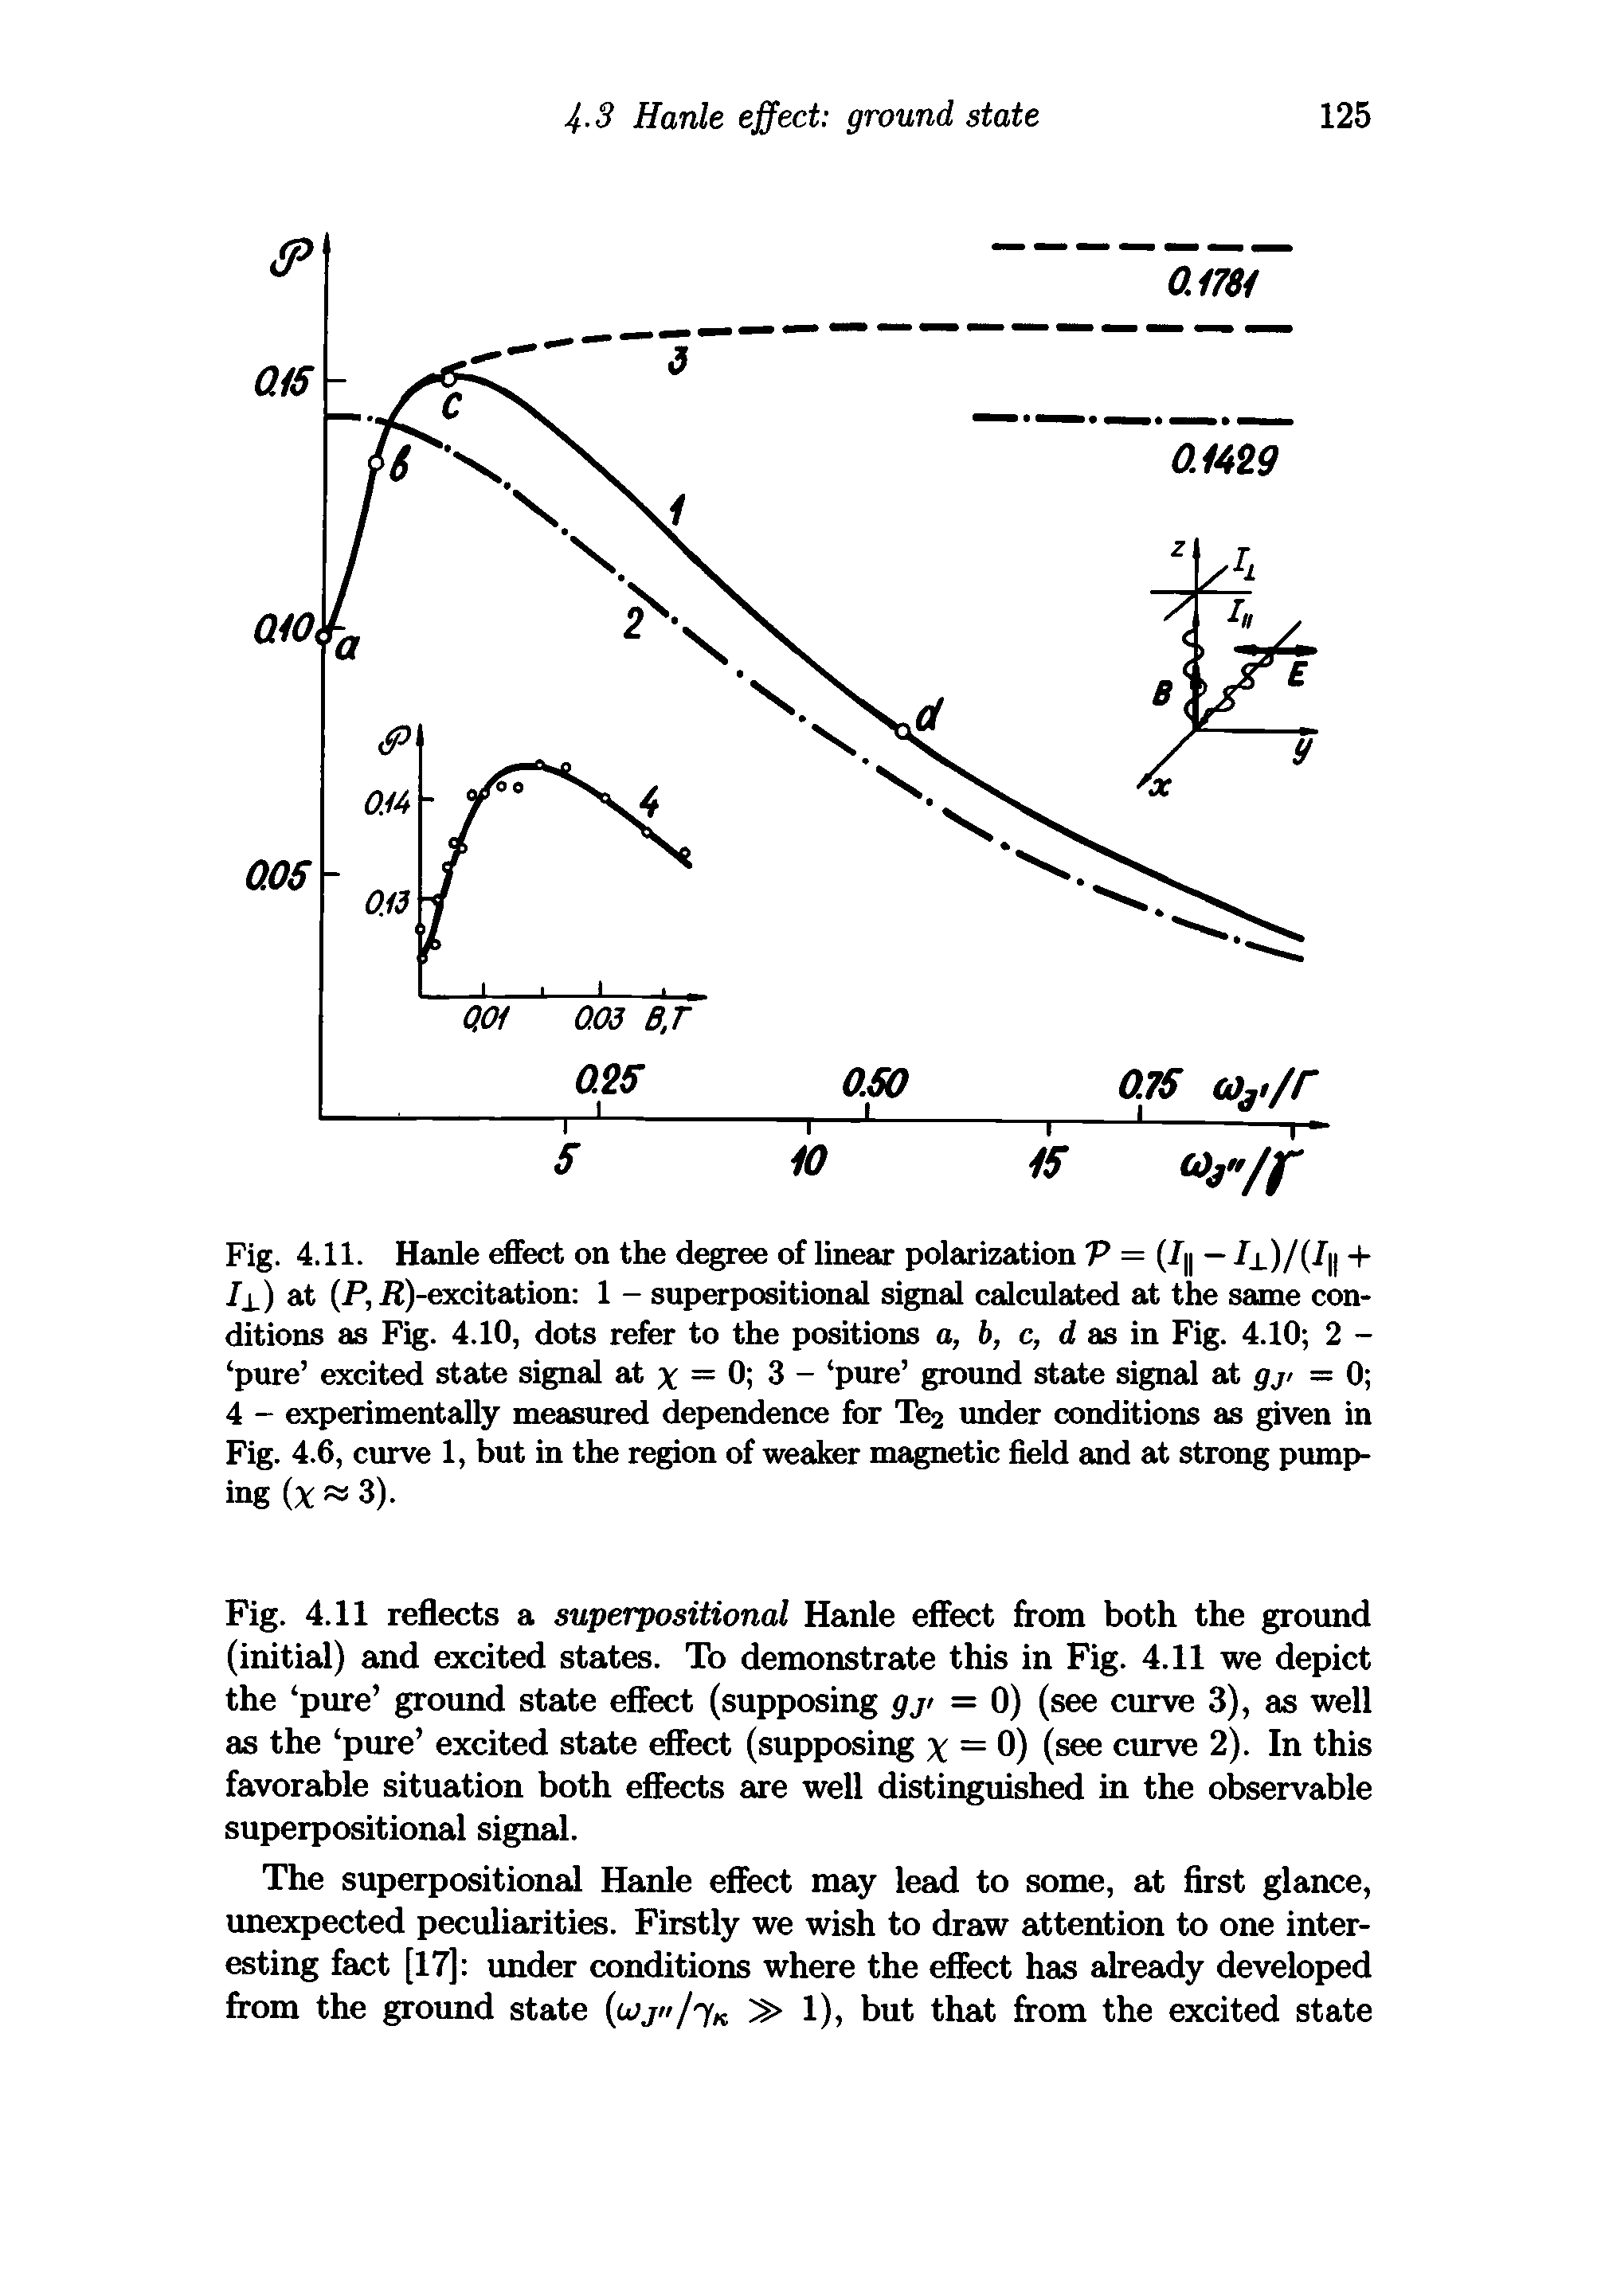 Fig. 4.11. Hanle effect on the degree of linear polarization V = (/y — Iff/(I + Iff) at (P, f )-excitation 1 - superpositional signal calculated at the same conditions as Fig. 4.10, dots refer to the positions a, b, c, d as in Fig. 4.10 2 - pure excited state signal at x = 0 3 - pure ground state signal at gj> = 0 4 - experimentally measured dependence for Te2 under conditions as given in Fig. 4.6, curve 1, but in the region of weaker magnetic field and at strong pumping (x 3).